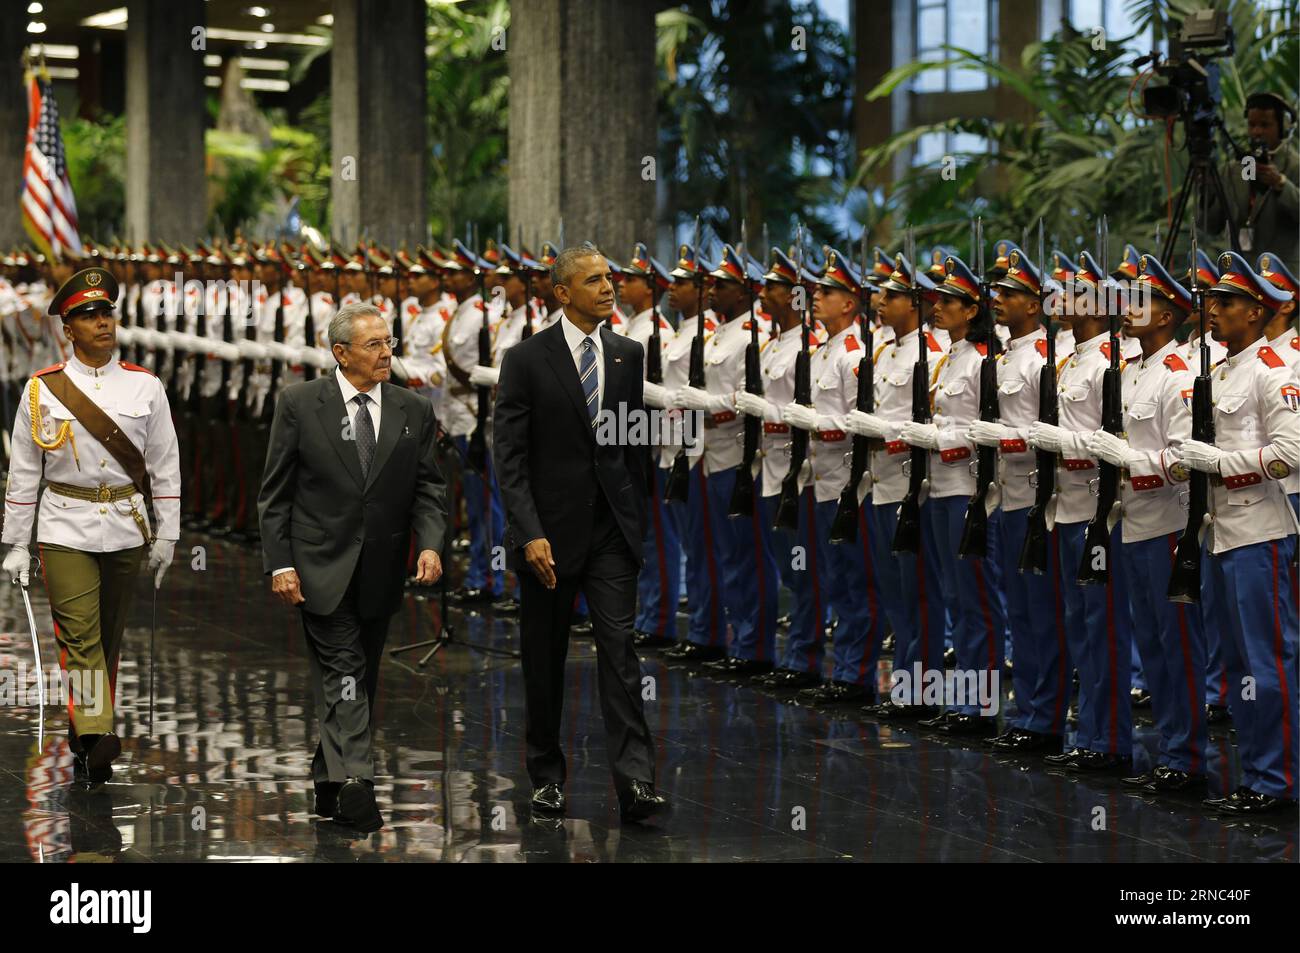 Image provided by shows Cuba s President Raul Castro (C, front) and U.S. President Barack Obama (R, front), inspecting the guard of honour at the Palace of the Revolution, in Havana, capital of Cuba on March 21, 2016. Barack Obama on Monday paid tribute to Cuban national hero Jose Marti in Havana, starting the official program of his historic visit to Cuba to strengthen the approach between the two countries. ) (jp) (ah) MANDATORY CREDIT NOT FOR ARCHIVE-NOT FOR SALES EDITORIAL USE ONLY CUBA-HAVANA-U.S.-PRESIDENT-MEETING CUBADEBATE PUBLICATIONxNOTxINxCHN   Image provided by Shows Cuba S Preside Stock Photo